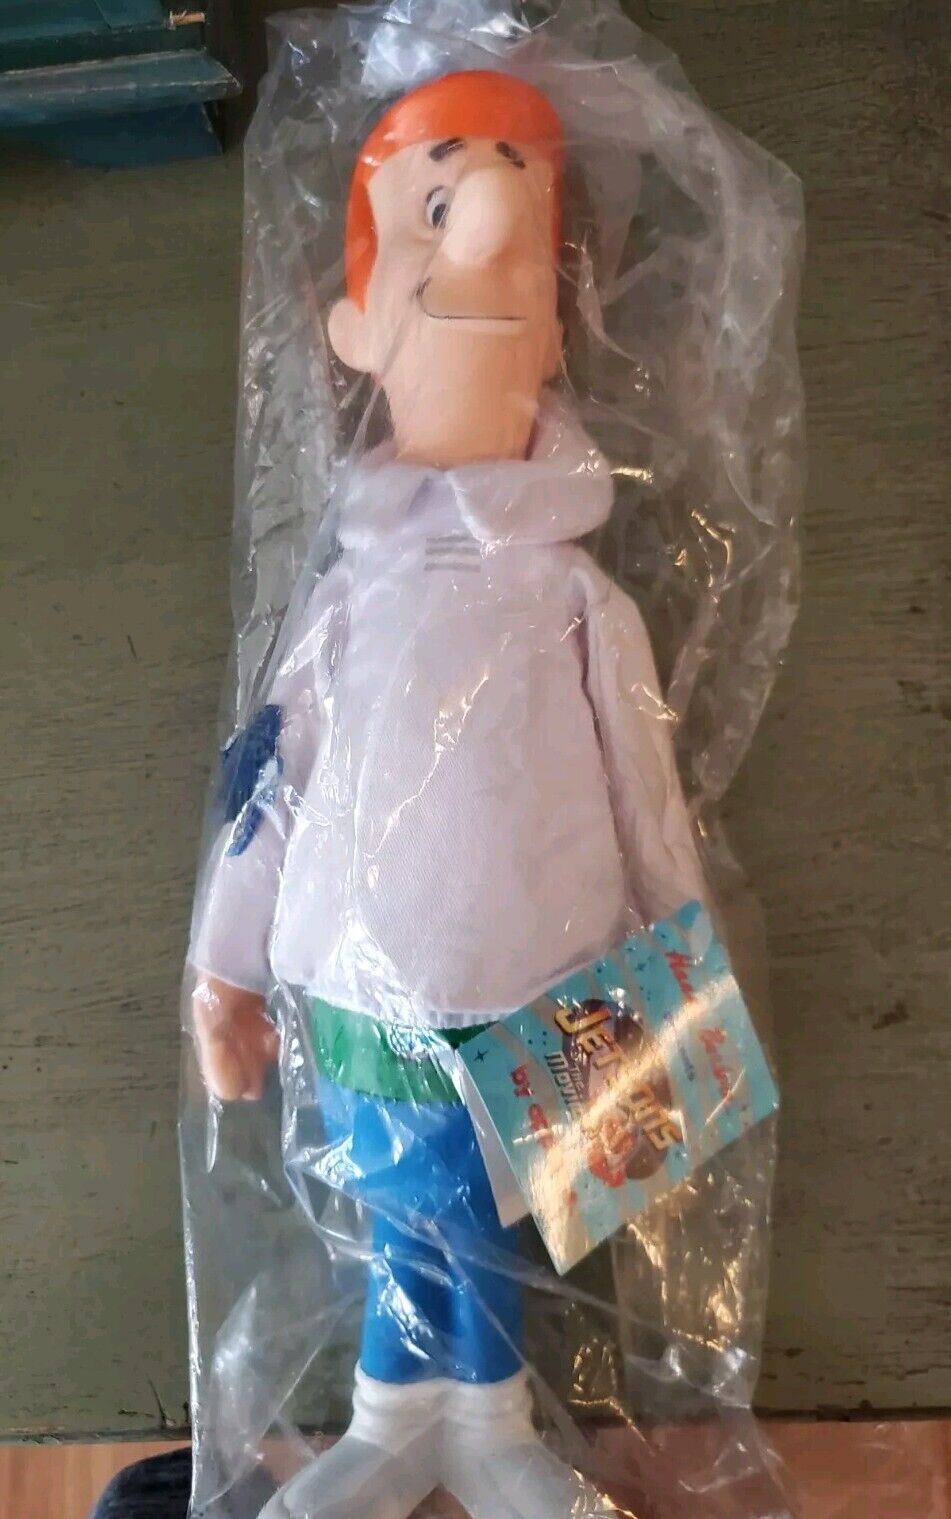 Vintage George JETSON Doll Hanna Barbera 1990 The Jetsons by Applaus with tags.